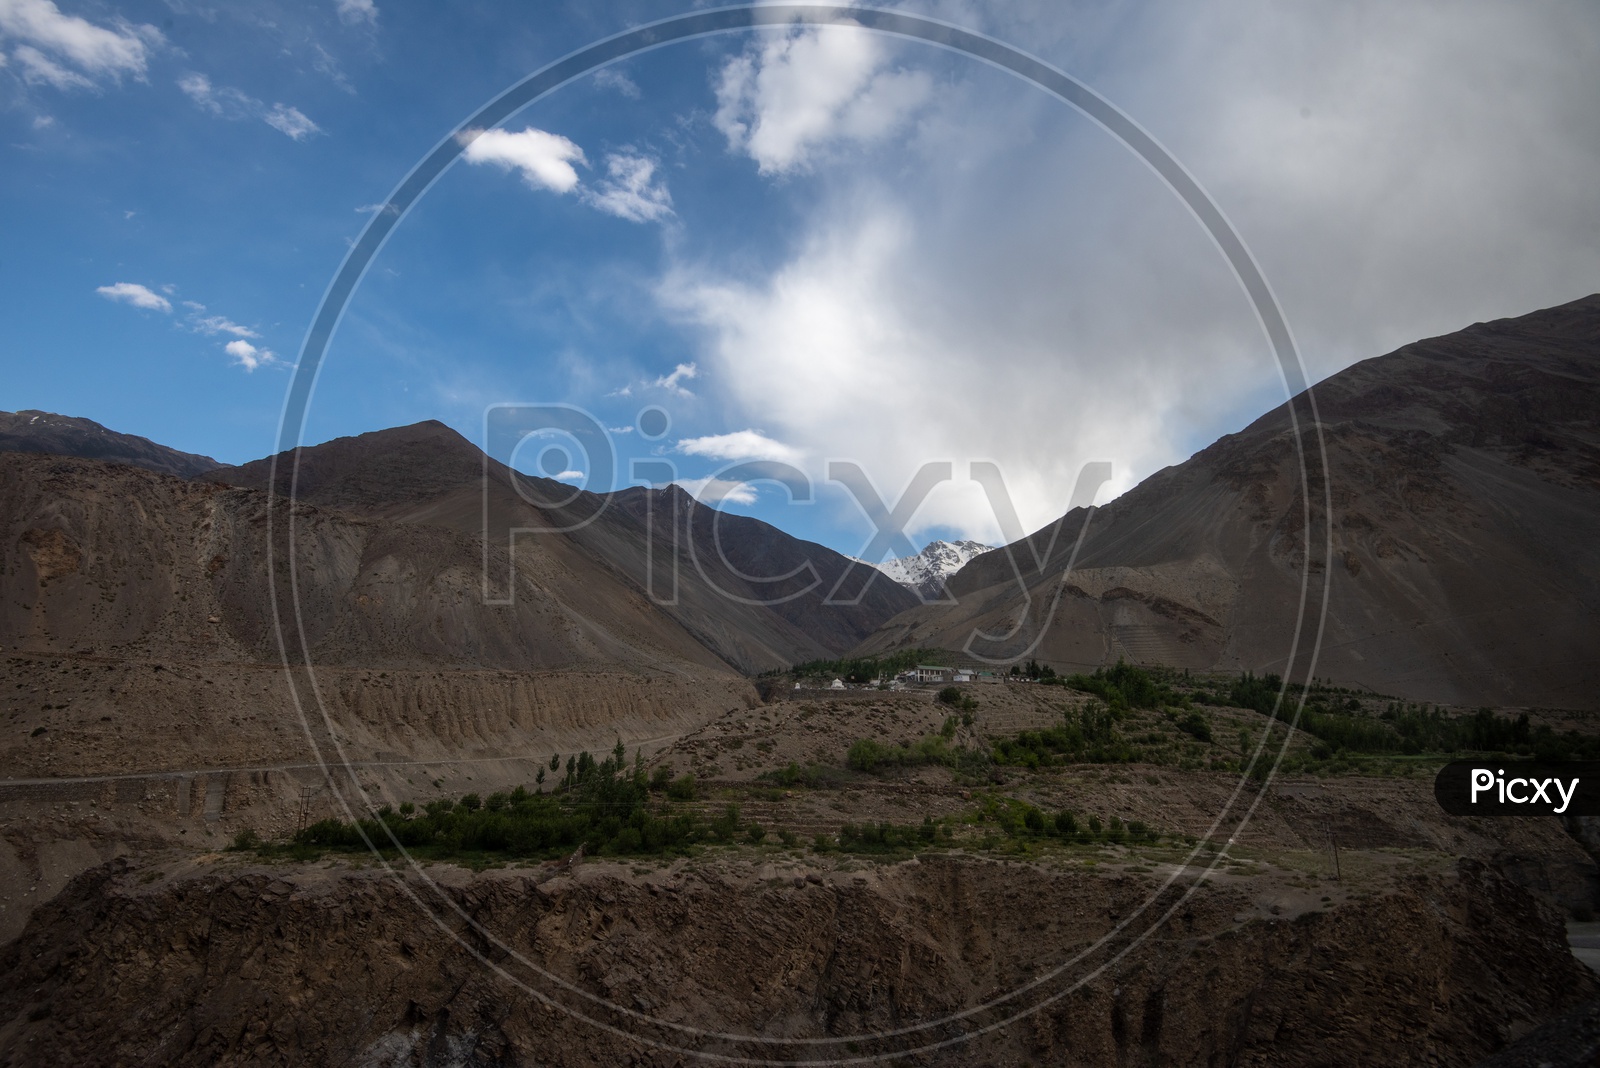 A Landscape Of a  Sand Dunes And Mountains in Leh